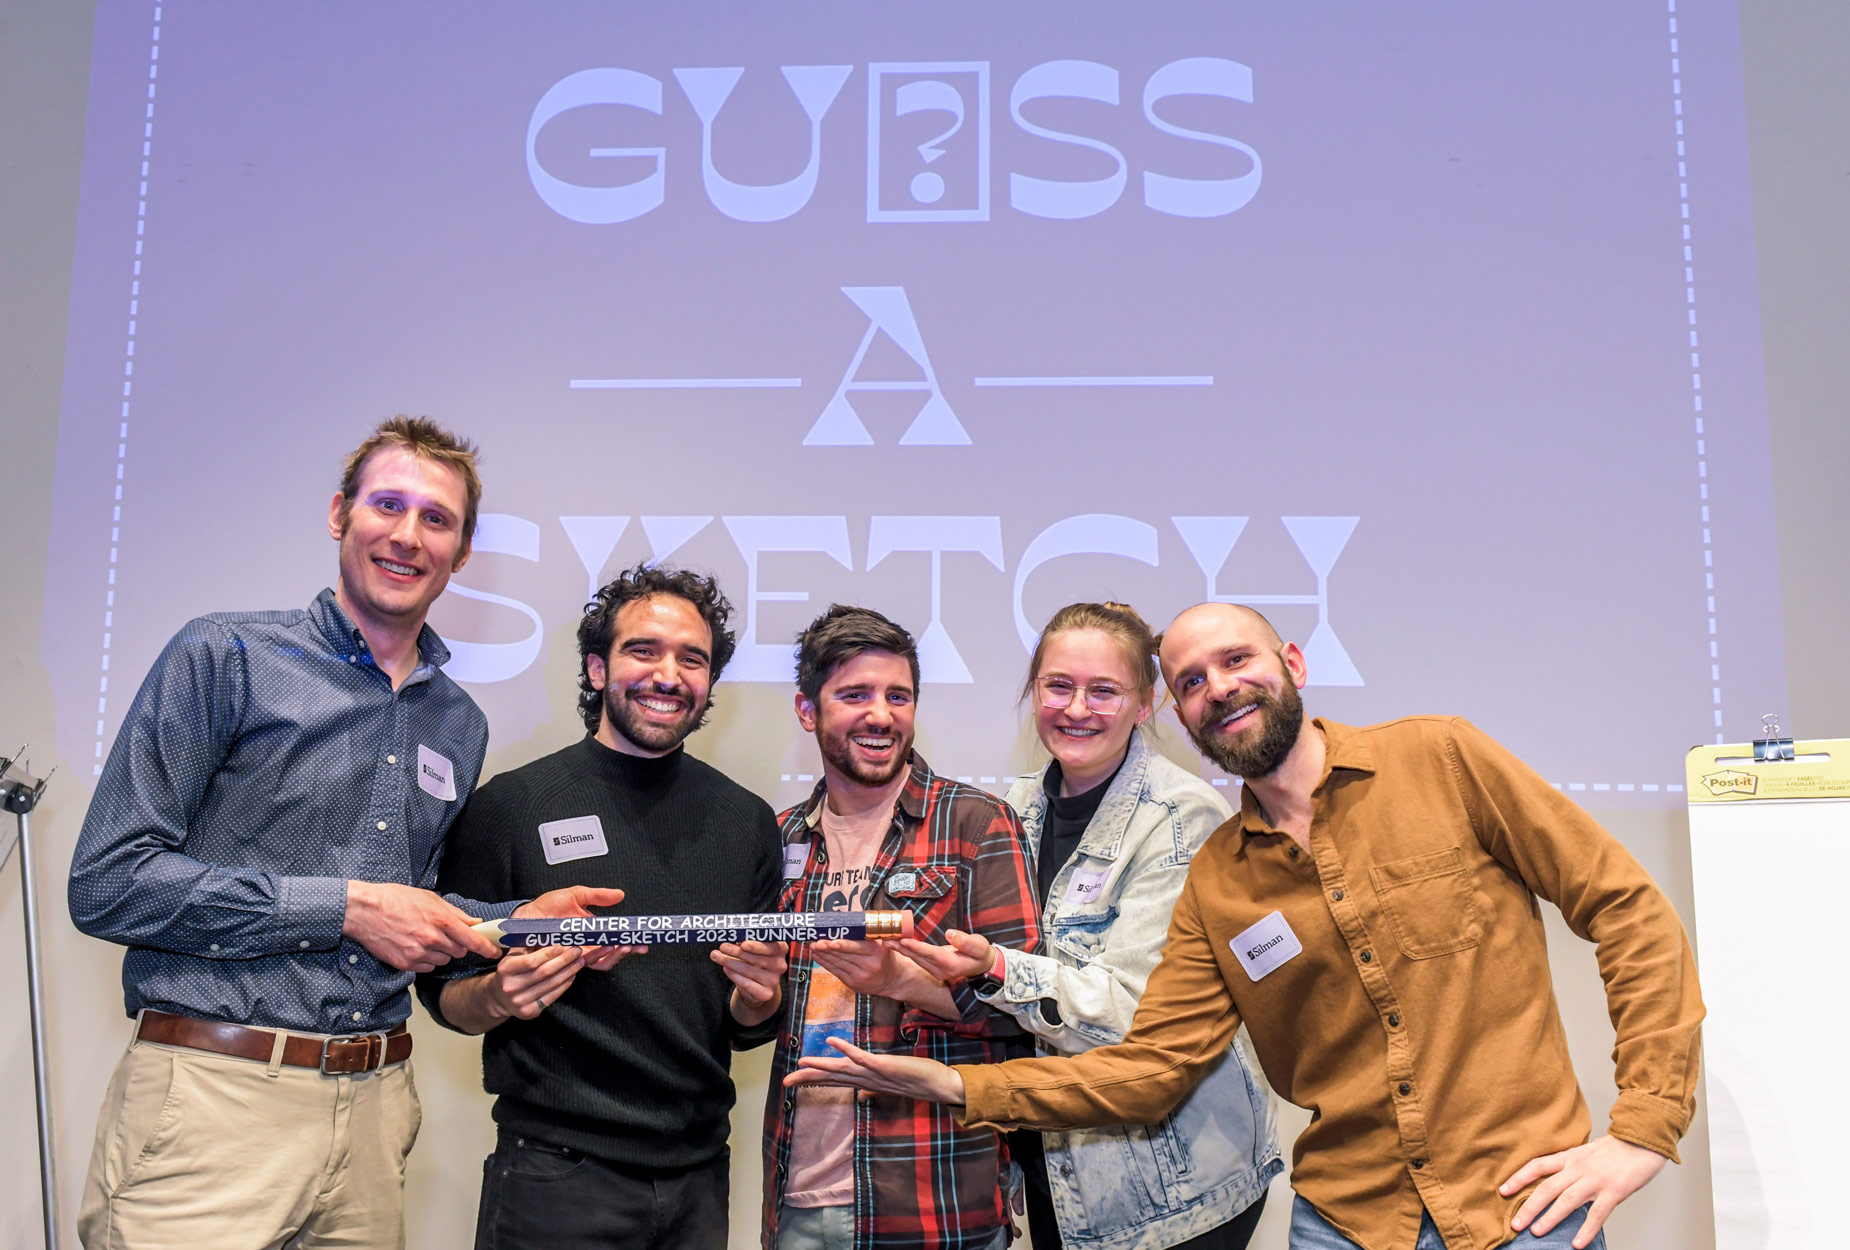 Guess-A-Sketch winners standing on stage in front of the logo.